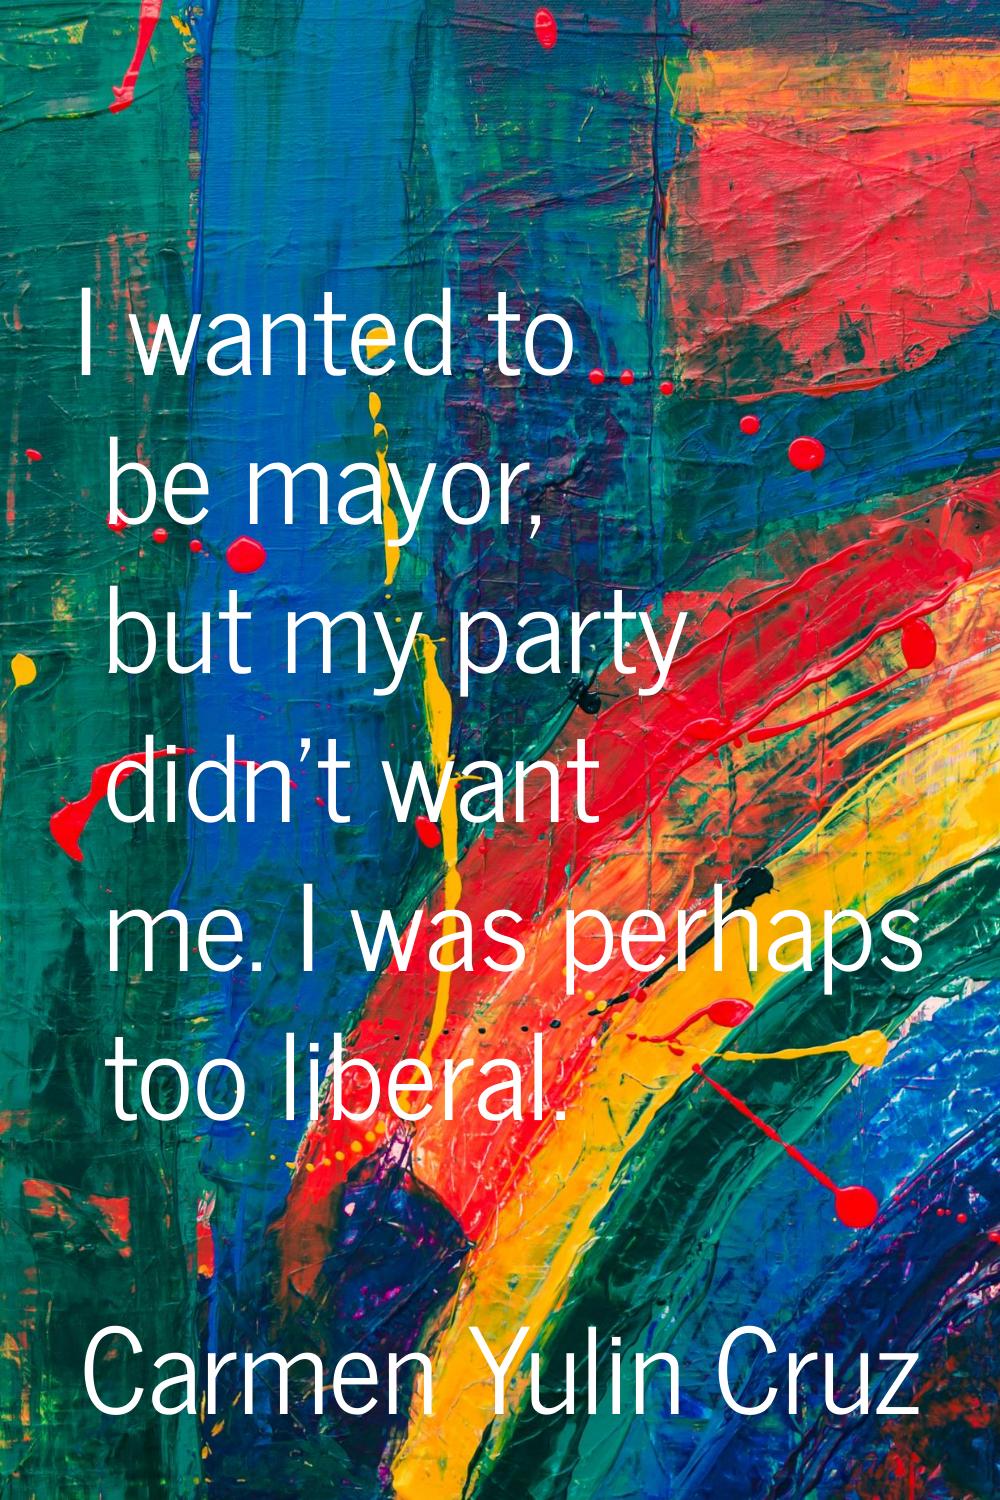 I wanted to be mayor, but my party didn't want me. I was perhaps too liberal.